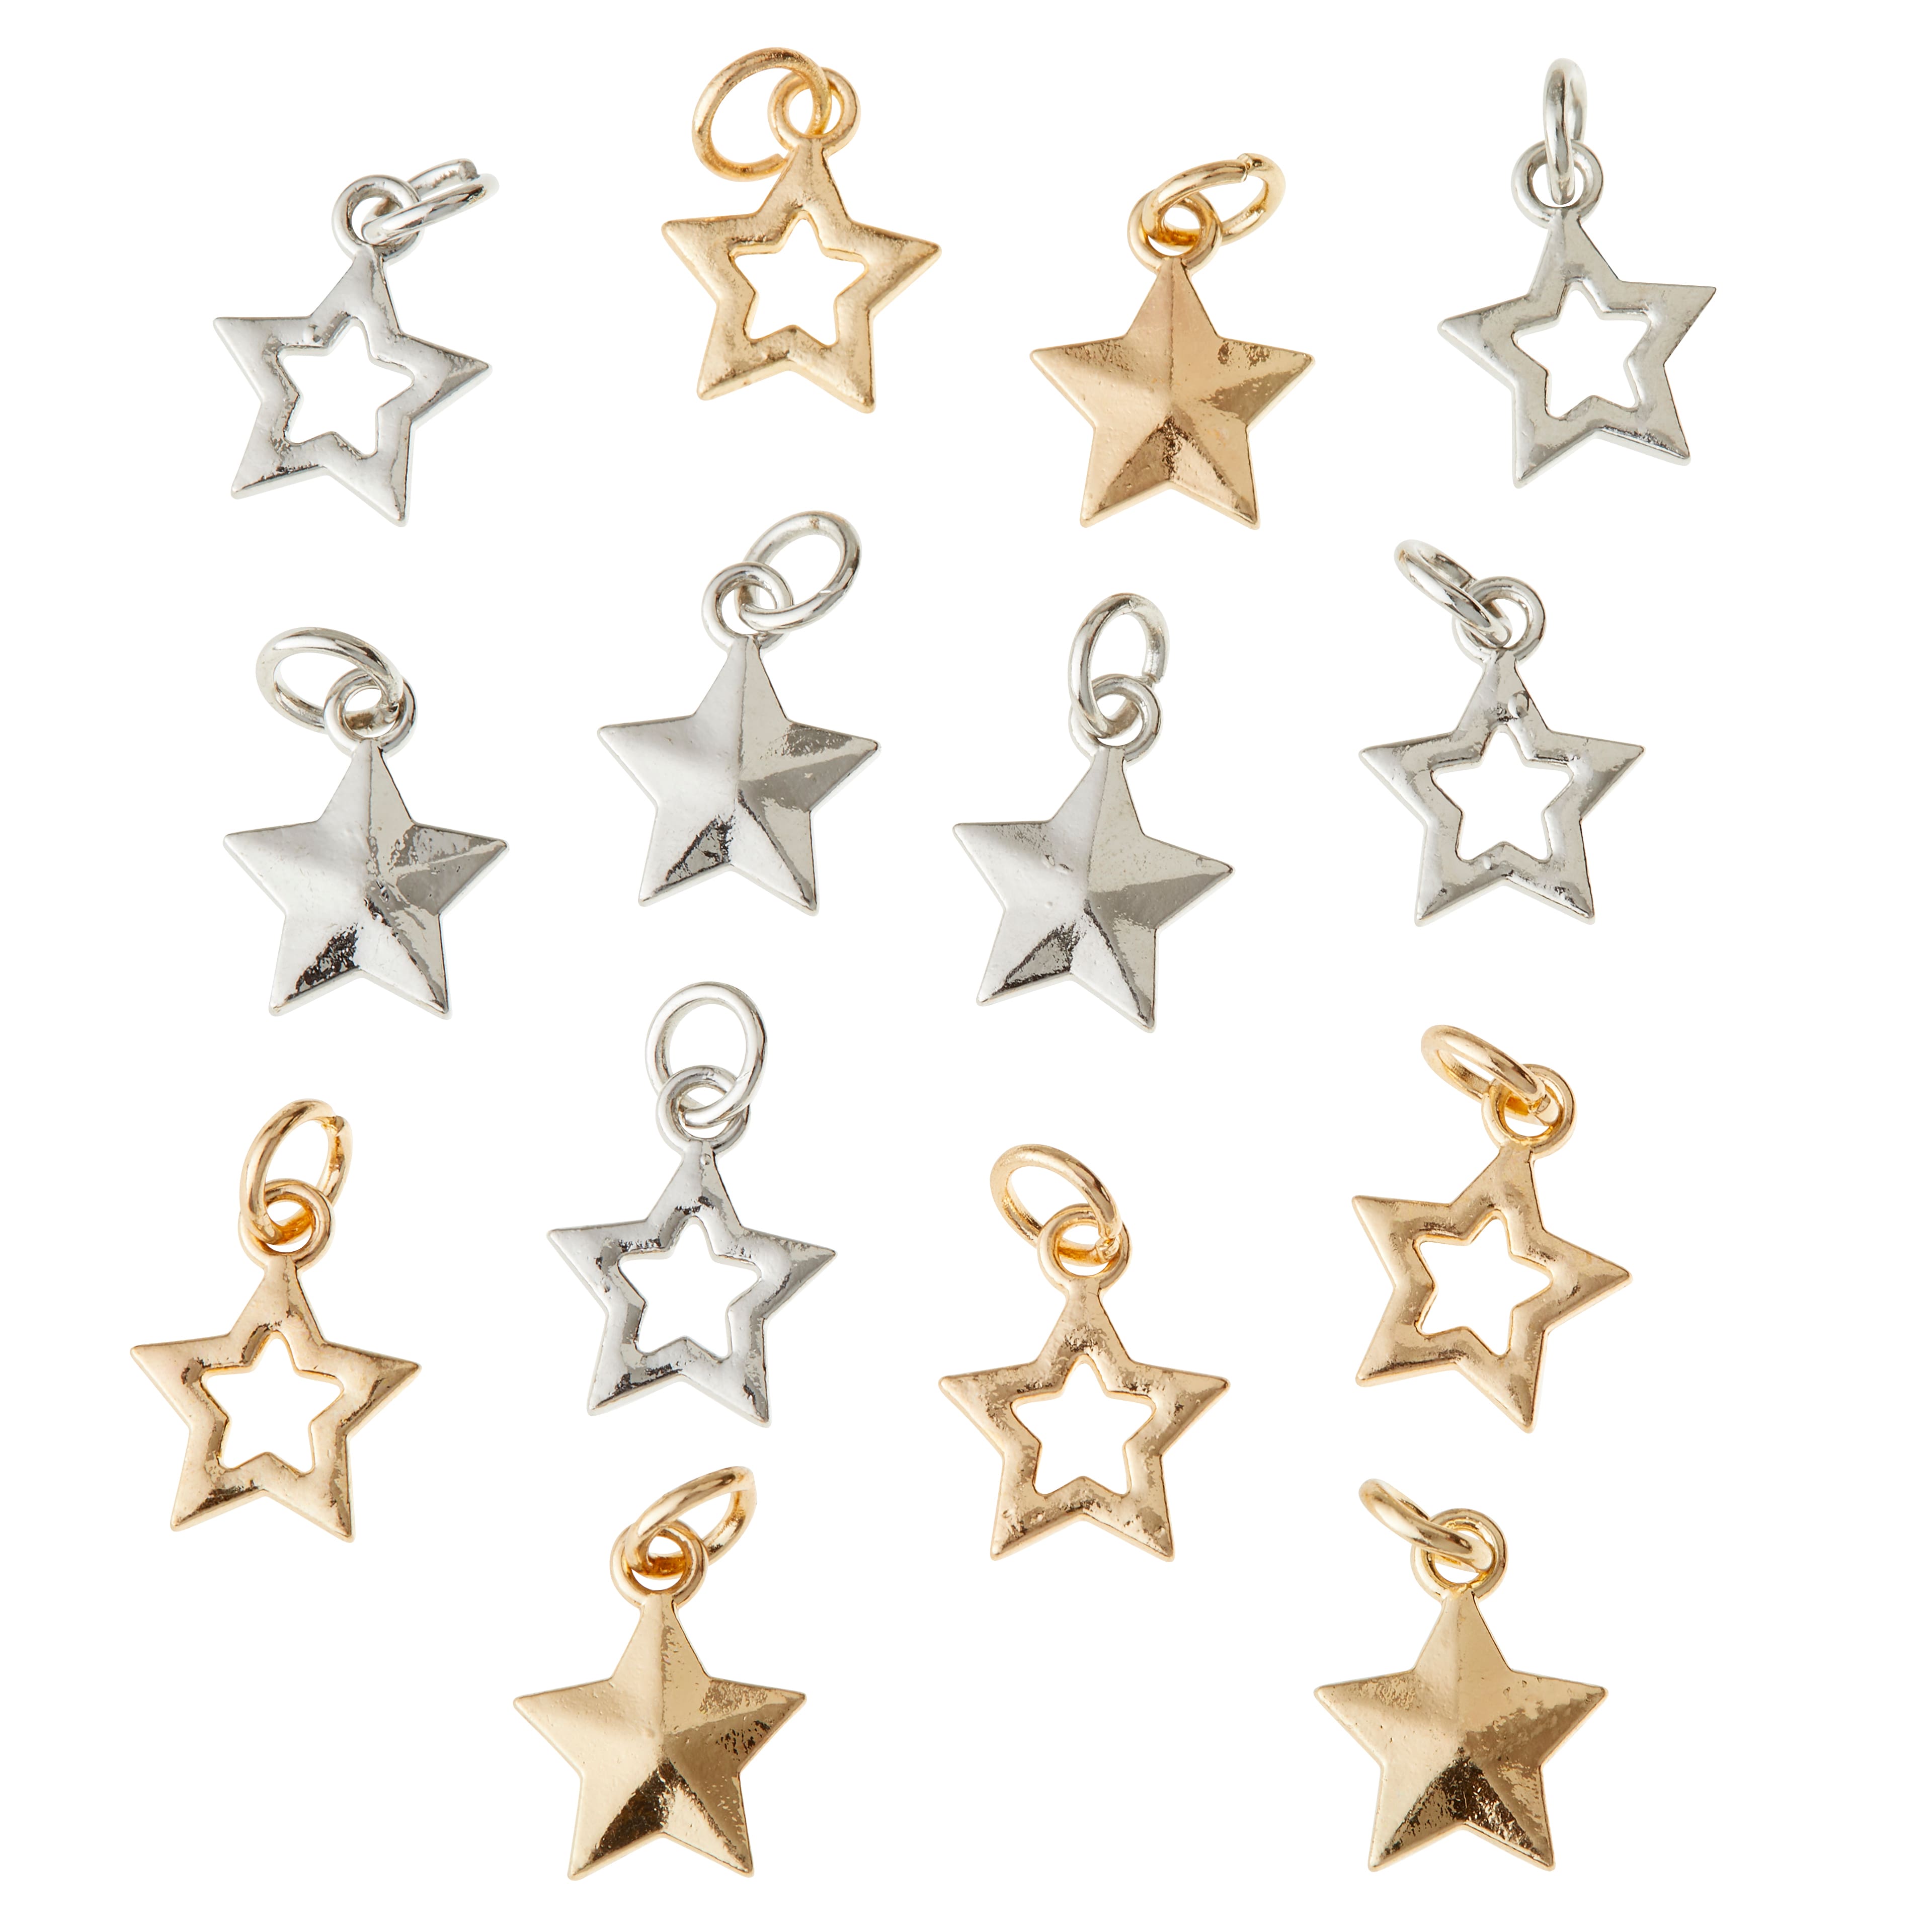 Inbagi 200 Pieces Star Pendant Mini Star Charms Alloy Dangle Star Shape  Charm Dangle Making Charms for DIY Jewelry Making and Crafting, 8 x  10mm(Gold